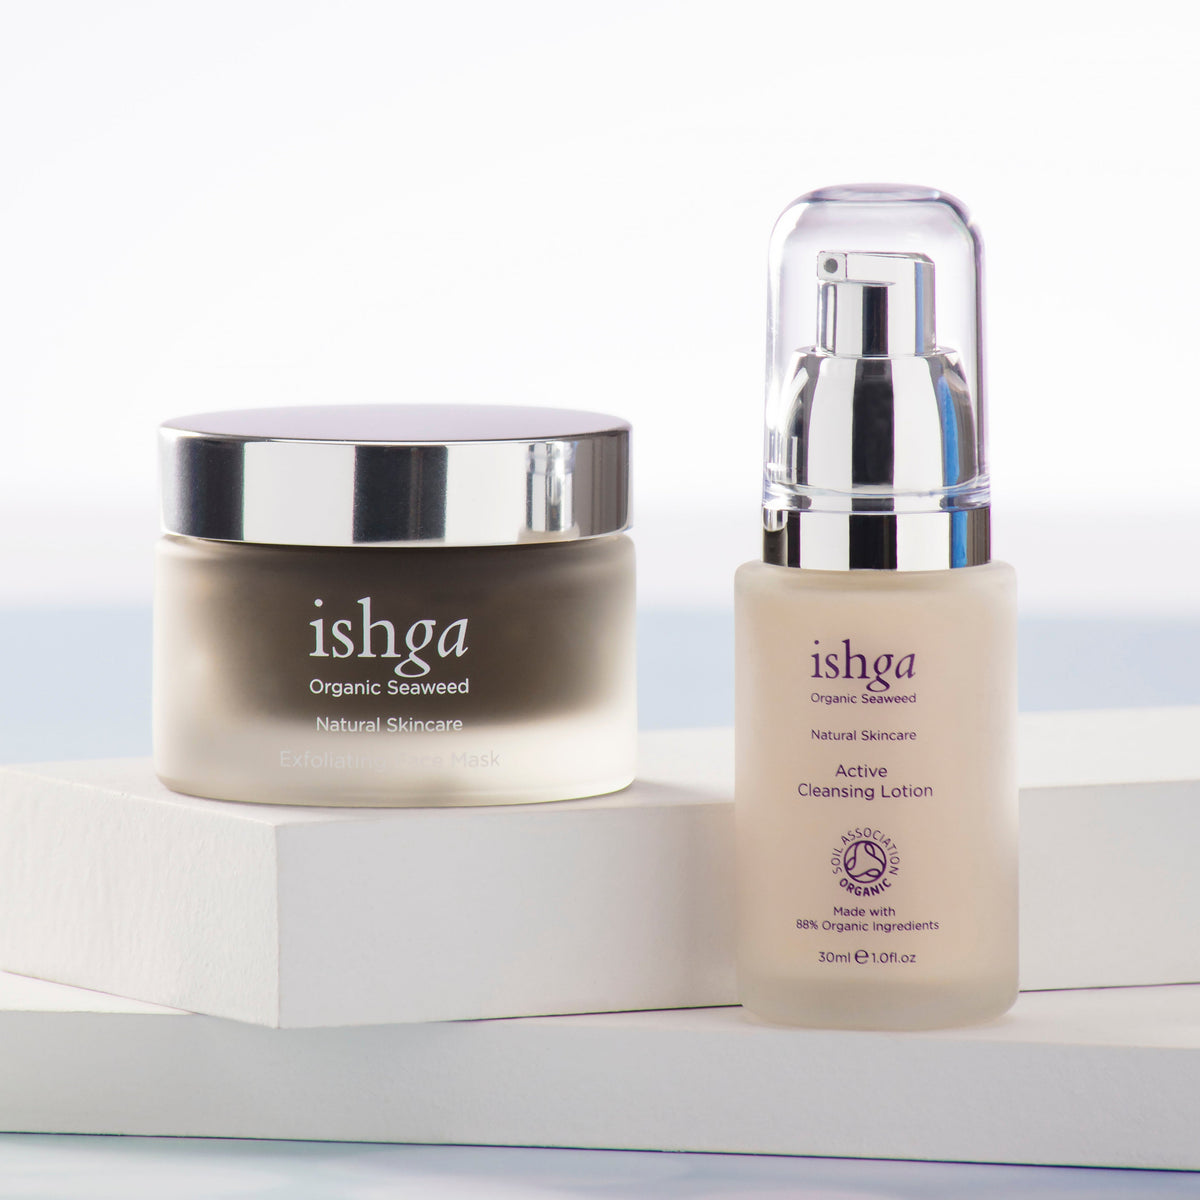 Jar of ishga Exfoliating Face Mask and bottle of Active Cleansing Lotion